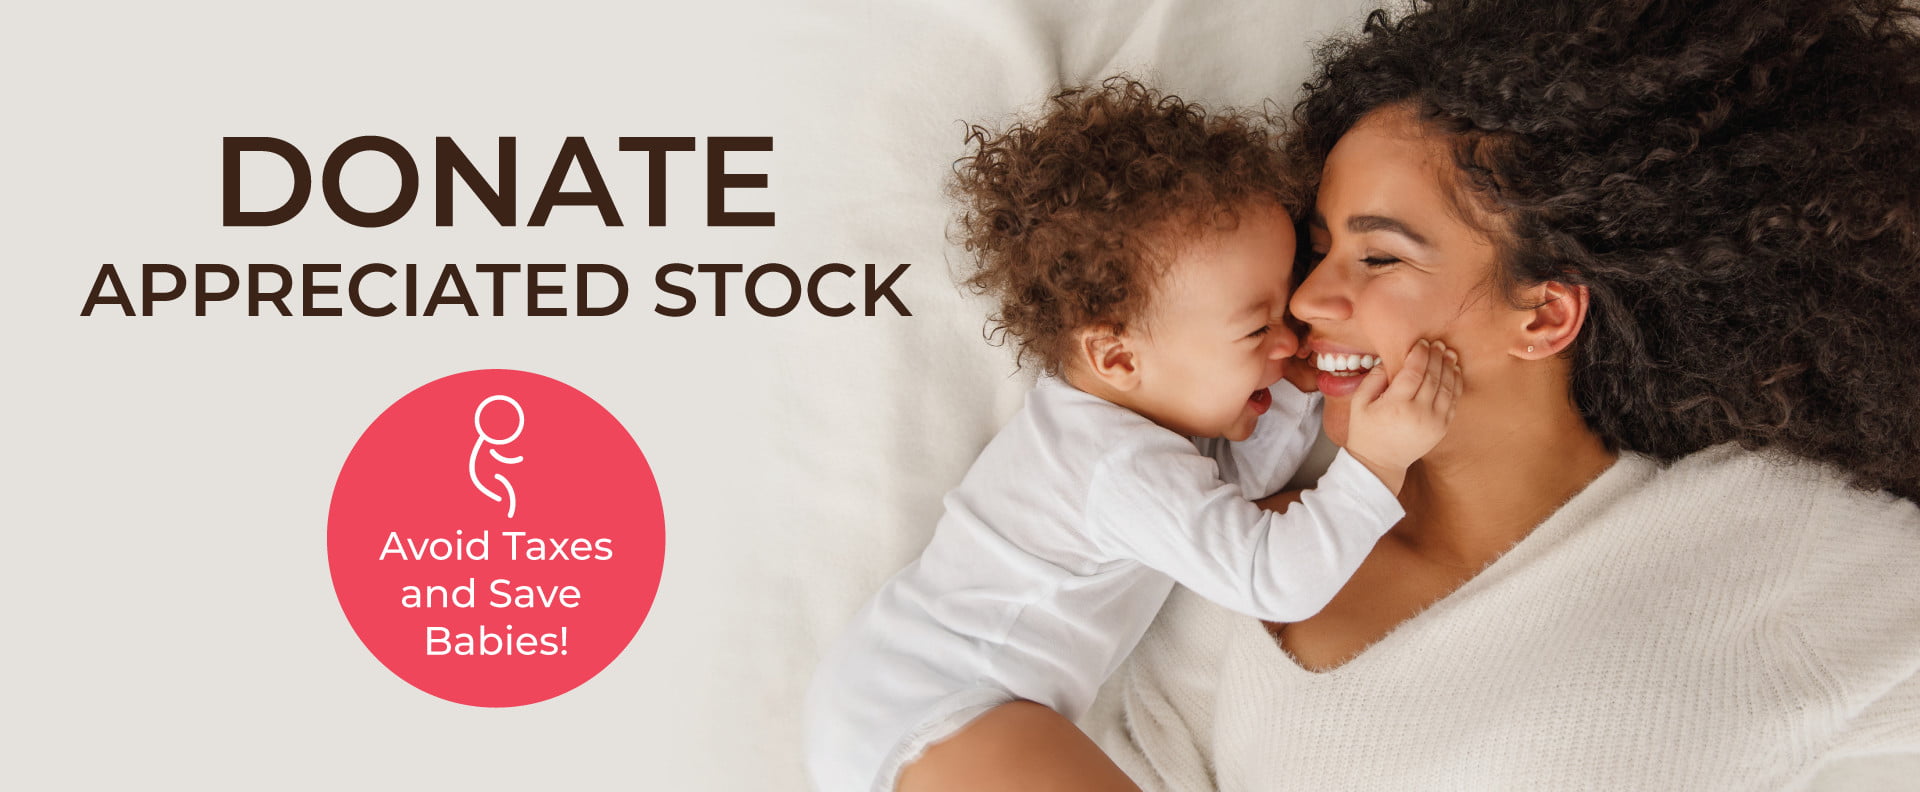 Donate Appreciated Stock, avoid taxes and save babies!